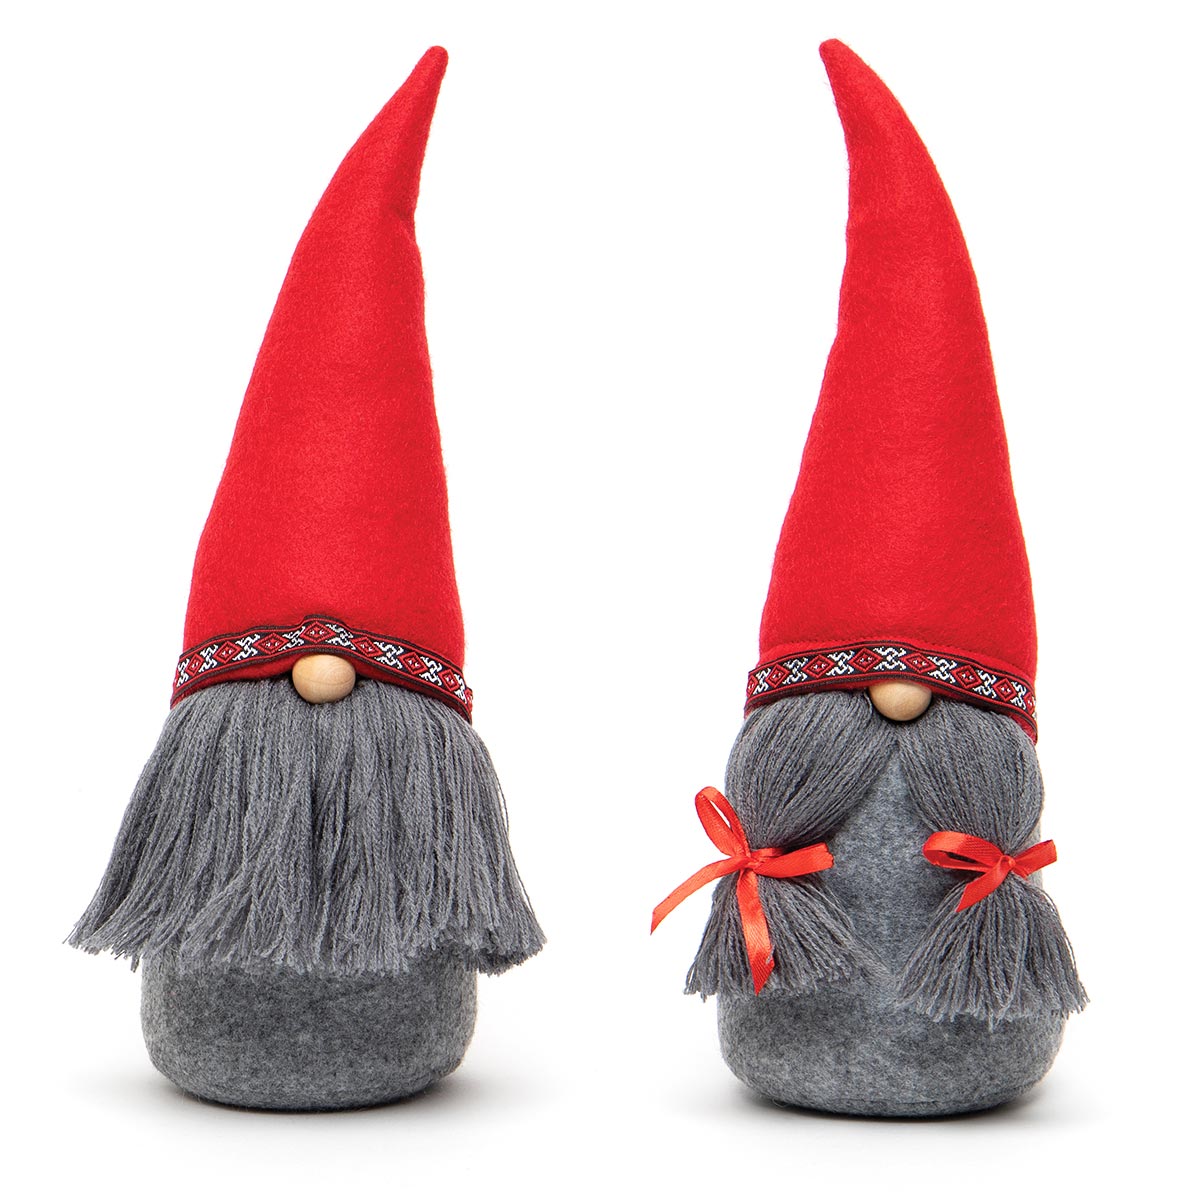 !FRITZ AND FREDA GNOME RED/GREY WITH HAT, WOOD NOSE AND